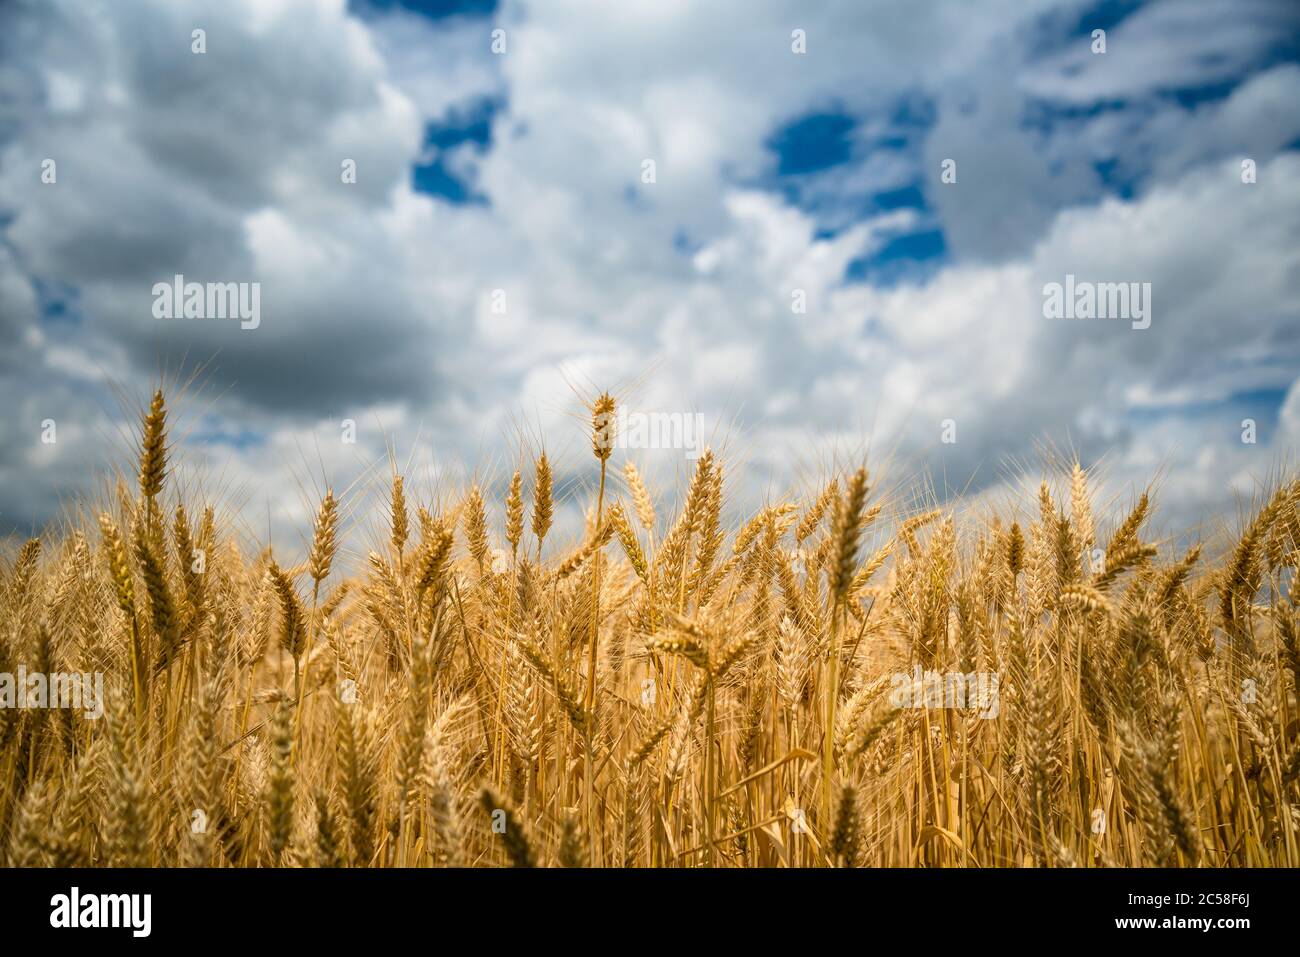 Golden wheat field with blue sky and white clouds in background Stock Photo